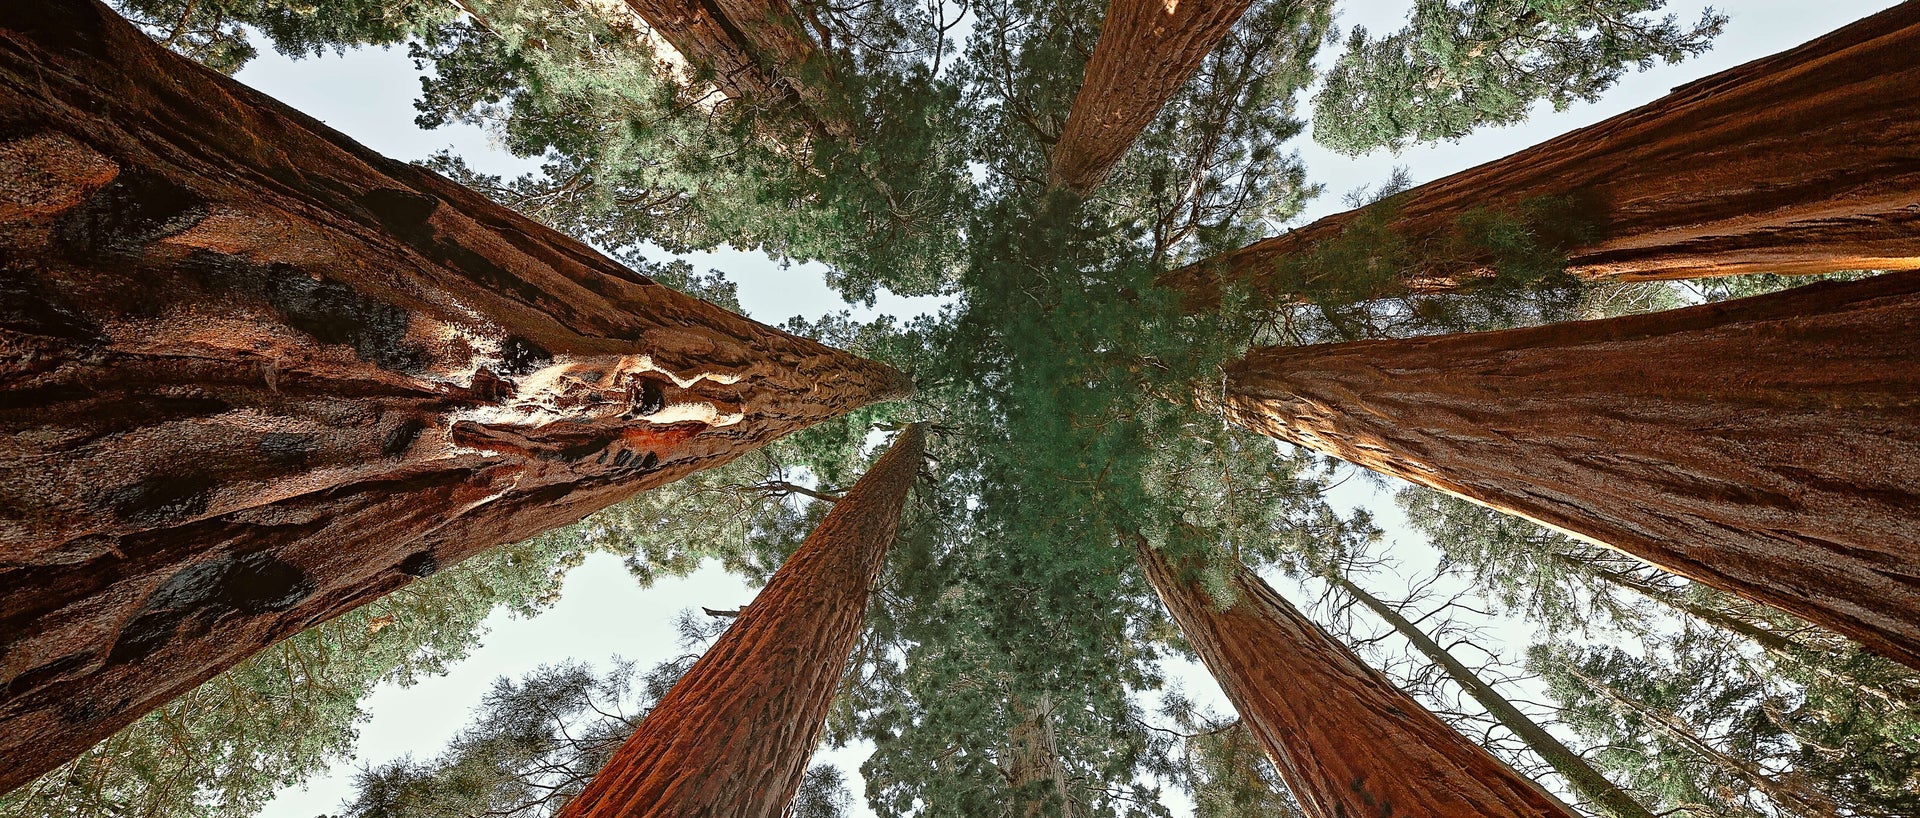 Upward shot of trees in Sequoia National Park